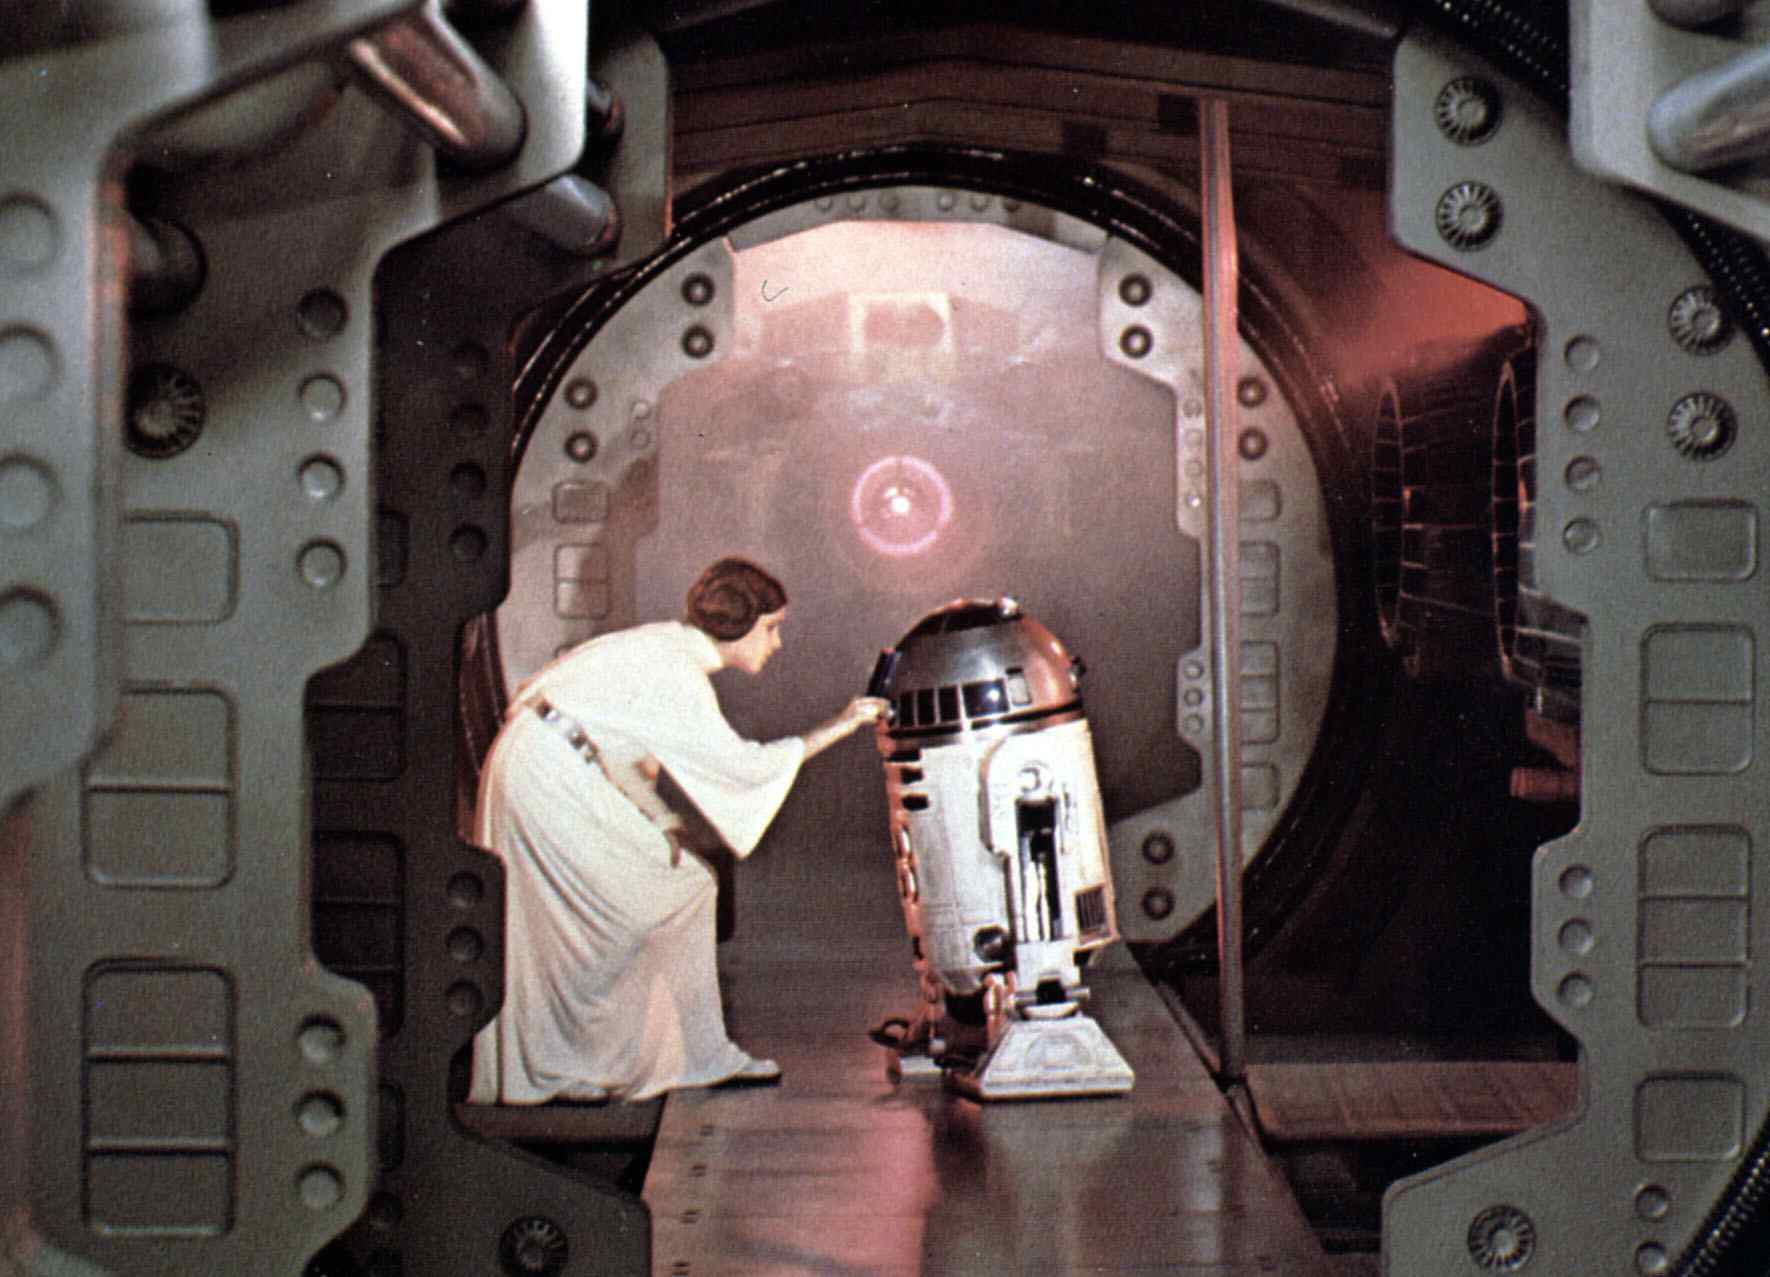 Princess Leia and R2-D2 in a hallway